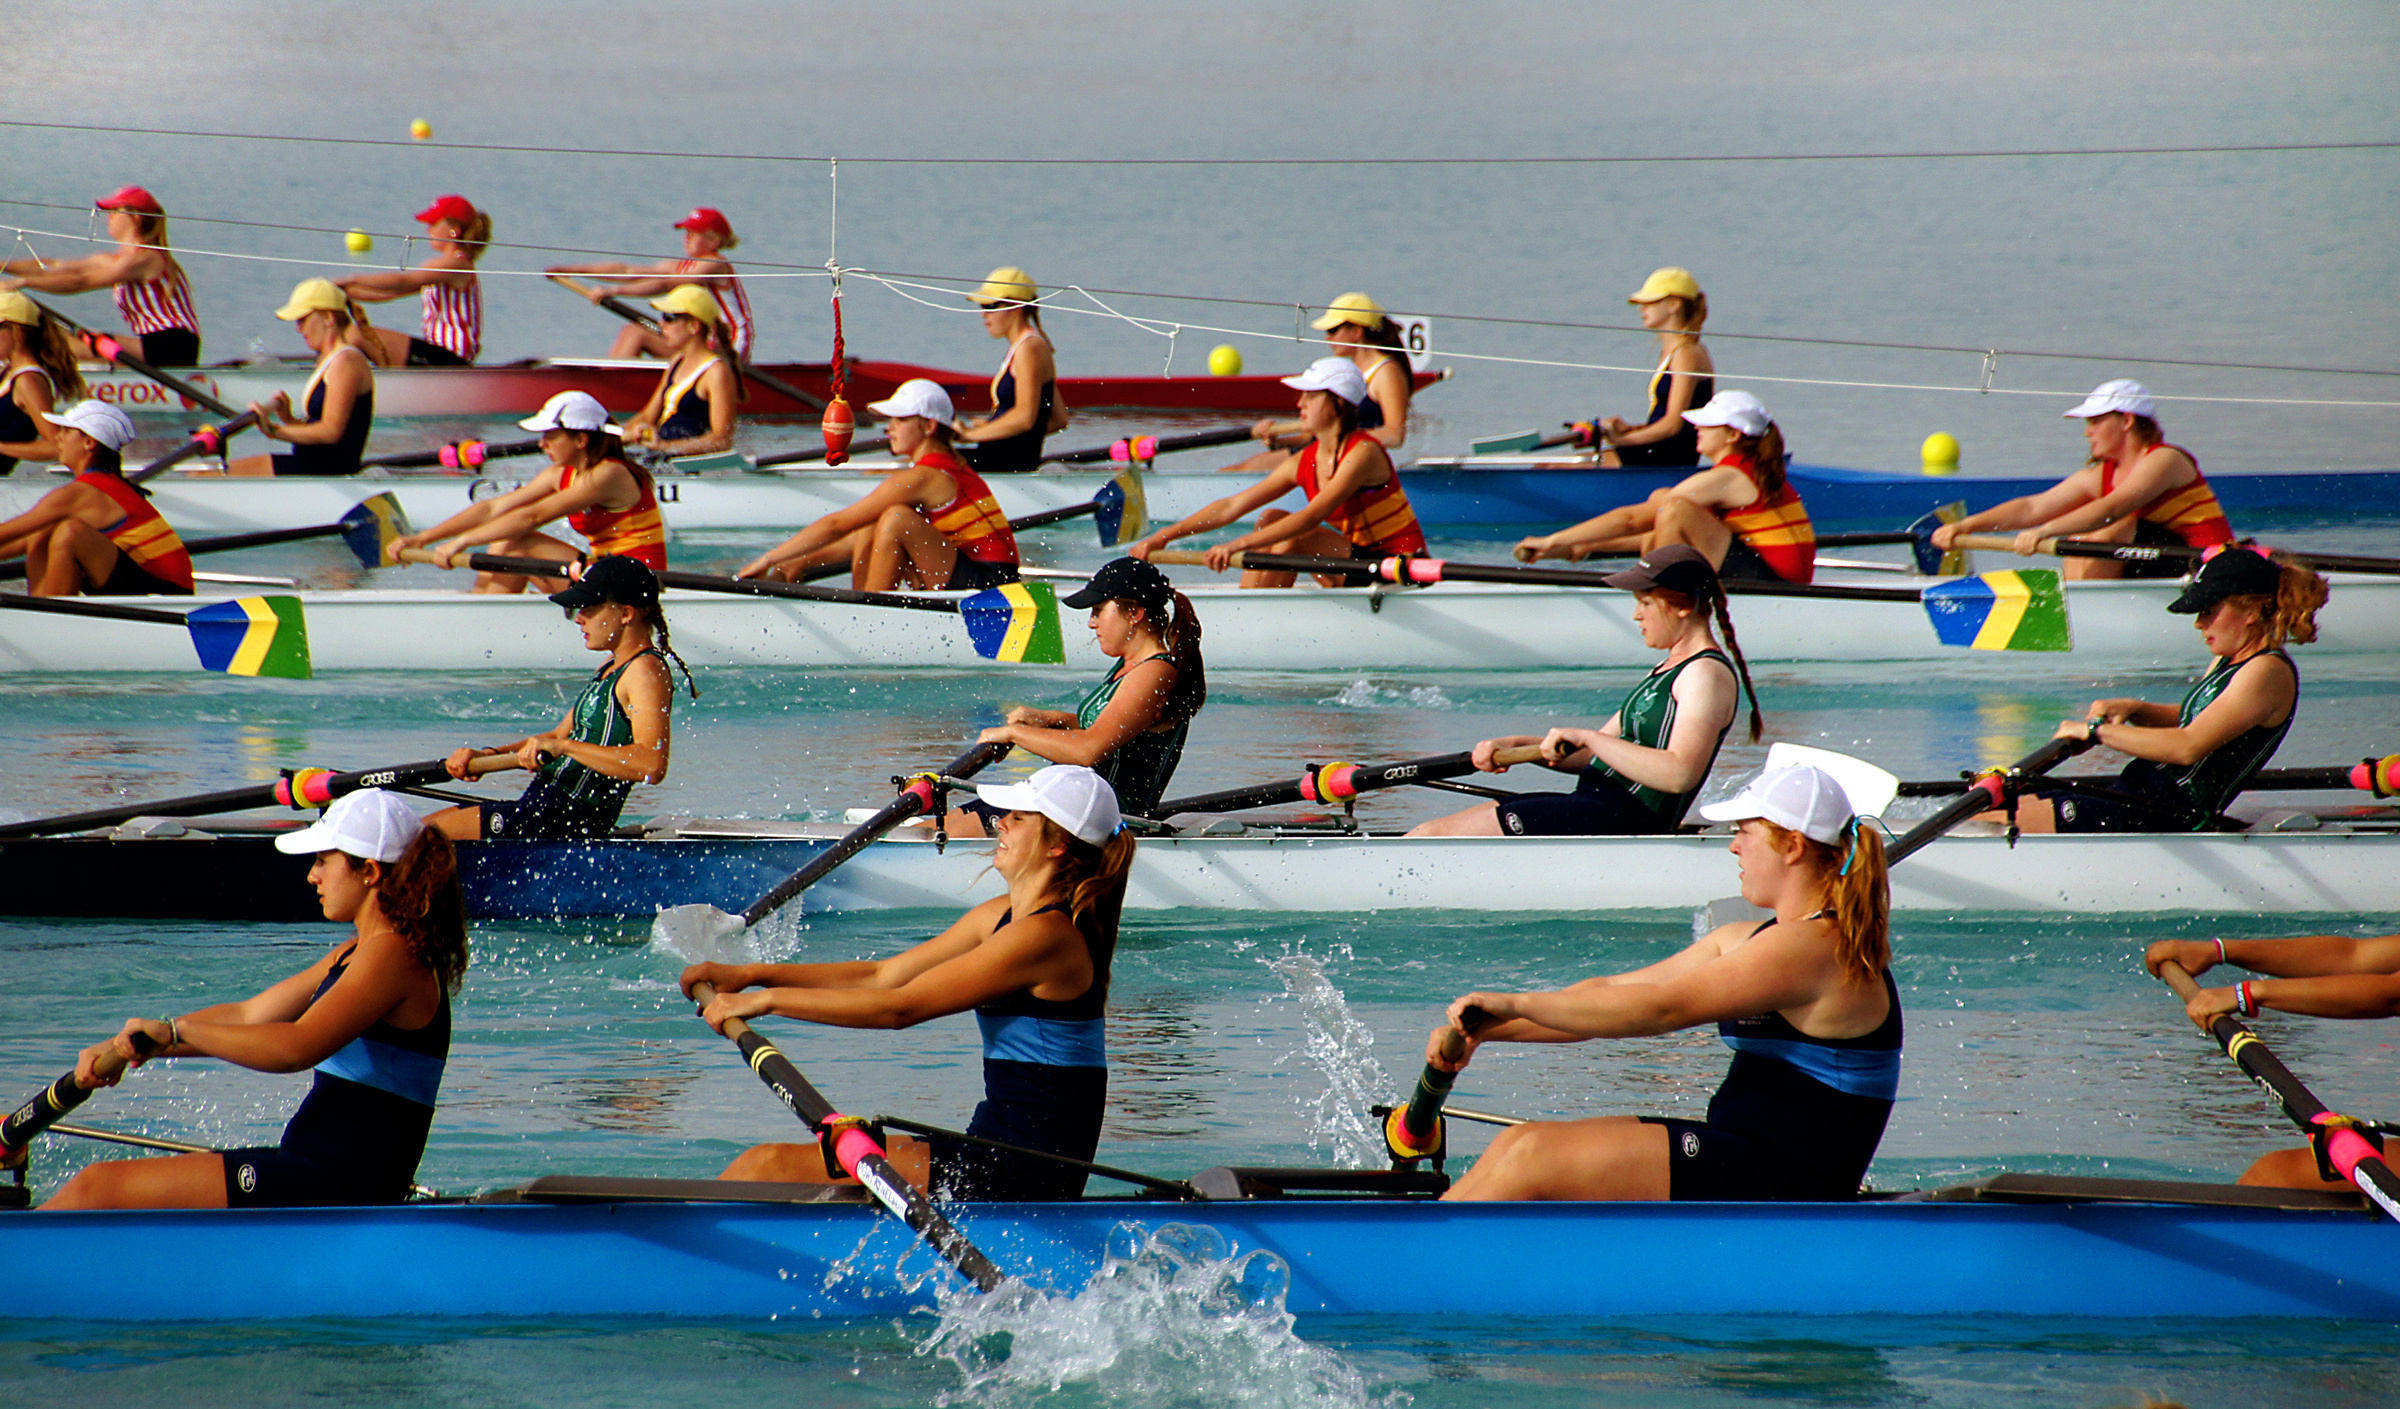 Rowing: A competitive sweep pulling, The women's team event, Regatta. 2400x1410 HD Wallpaper.